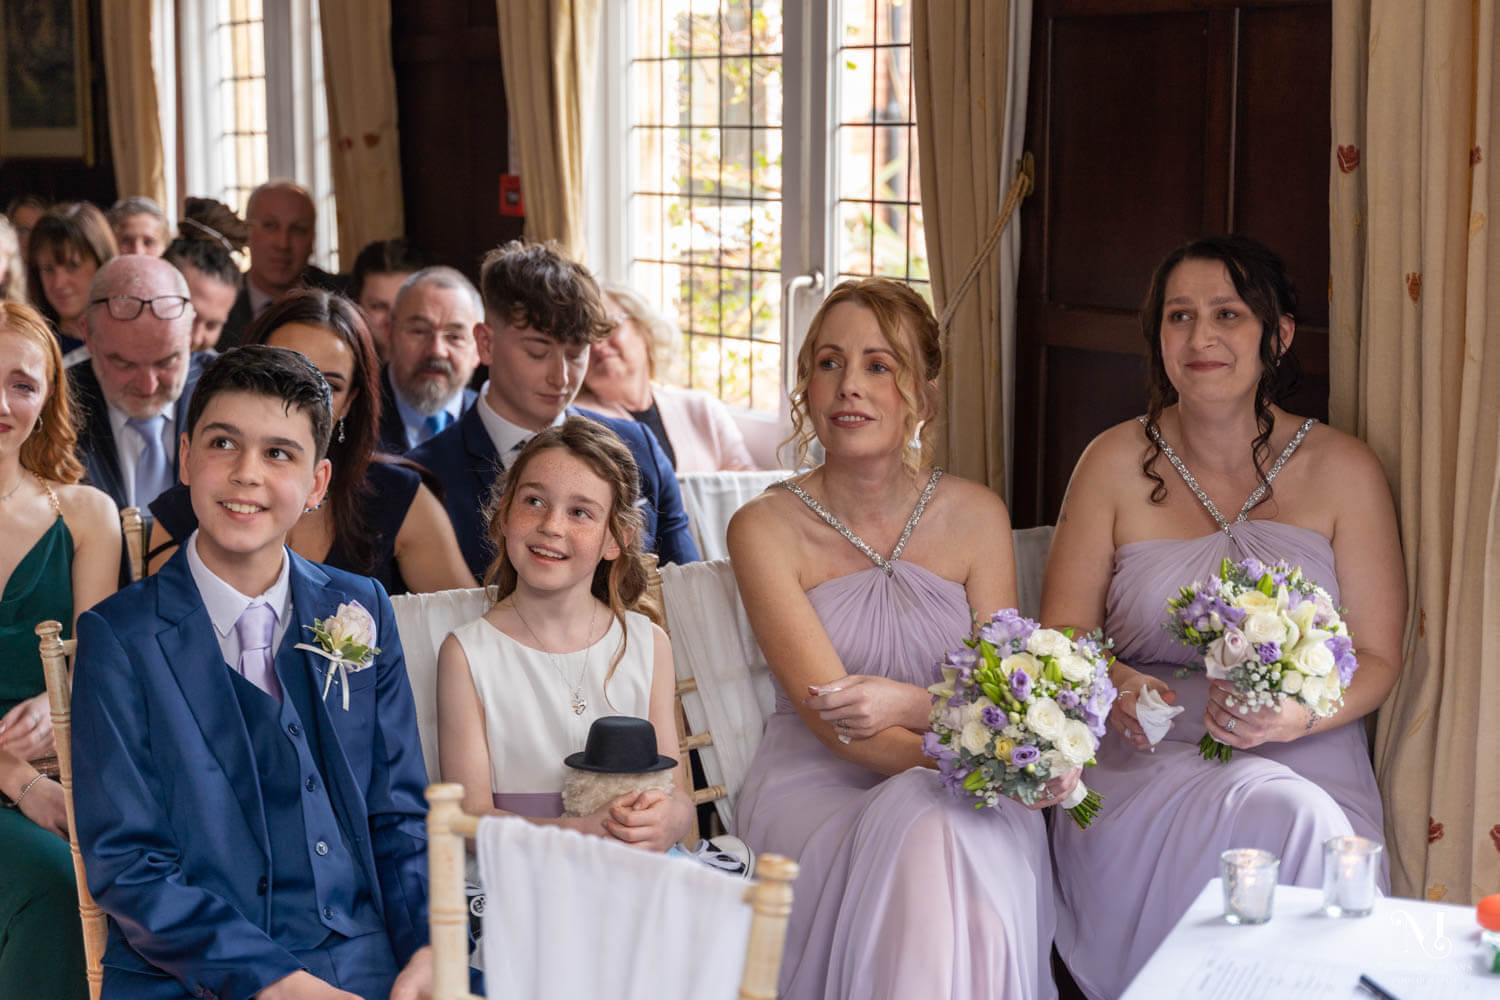 the children of the couple and the adult bridesmaids sit and watch the couple getting married